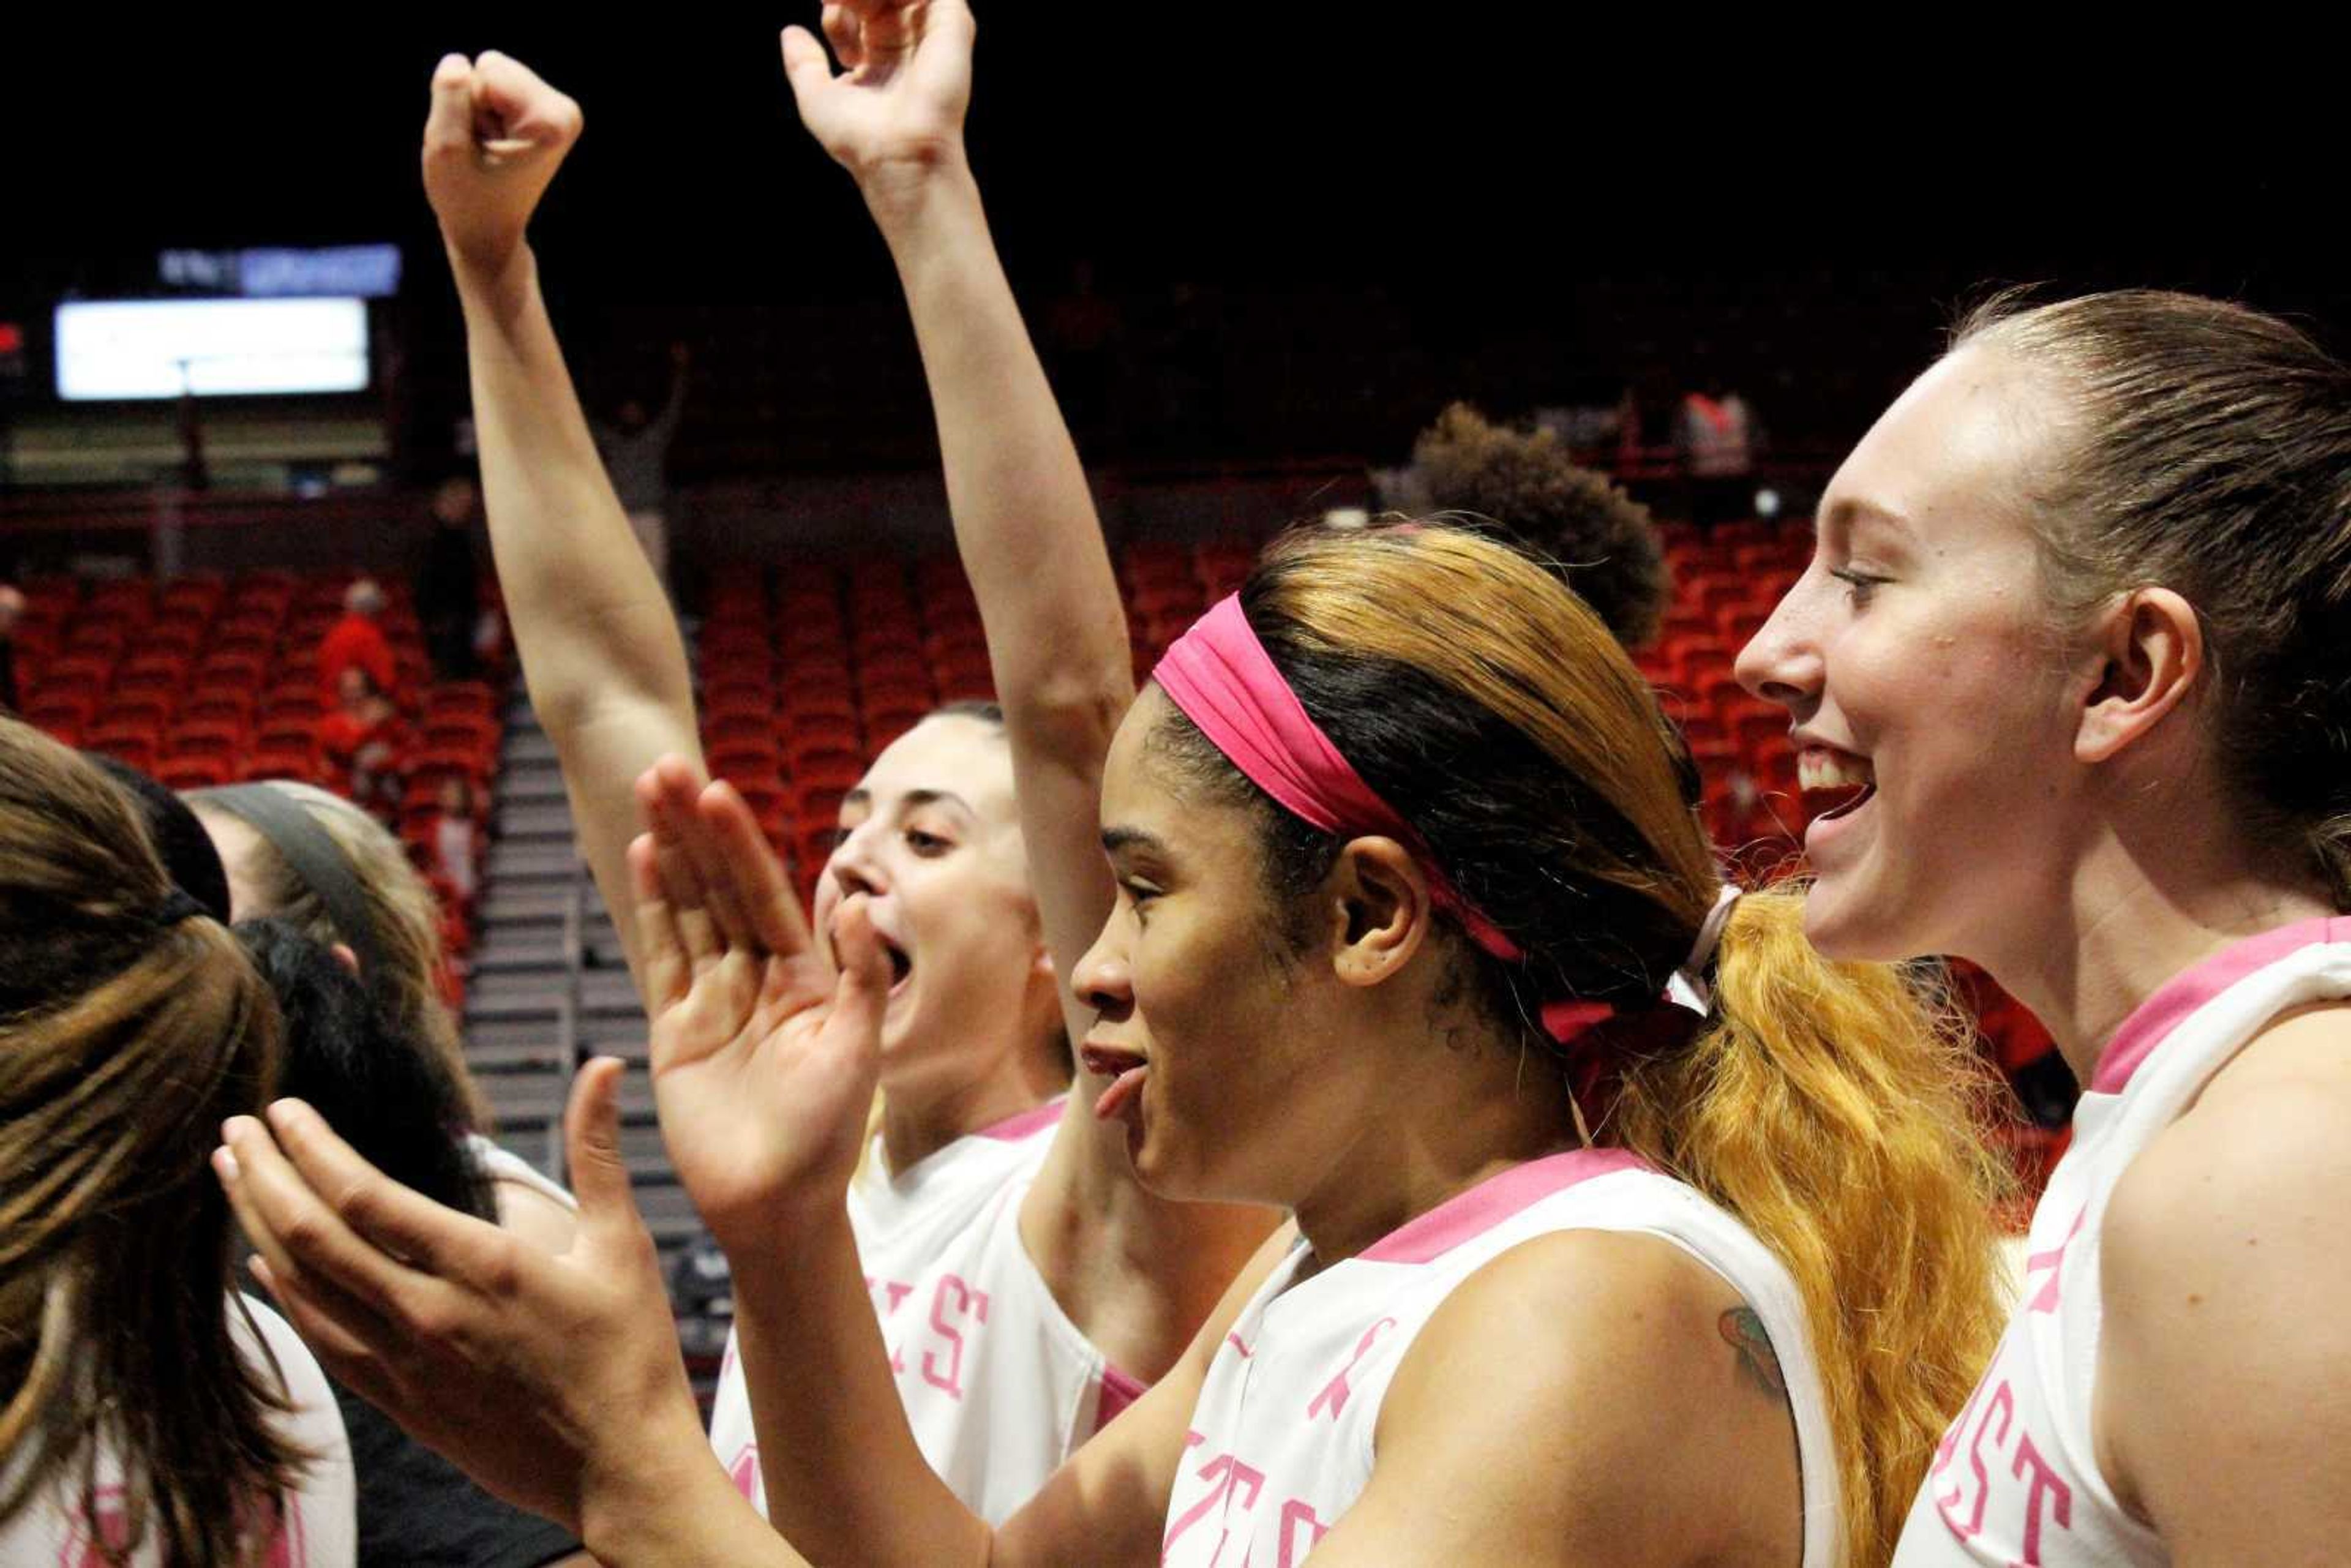 The women's basketball team celebrates their victory over the Eastern Illinois Panthers in the Show Me Center on Feb. 14.